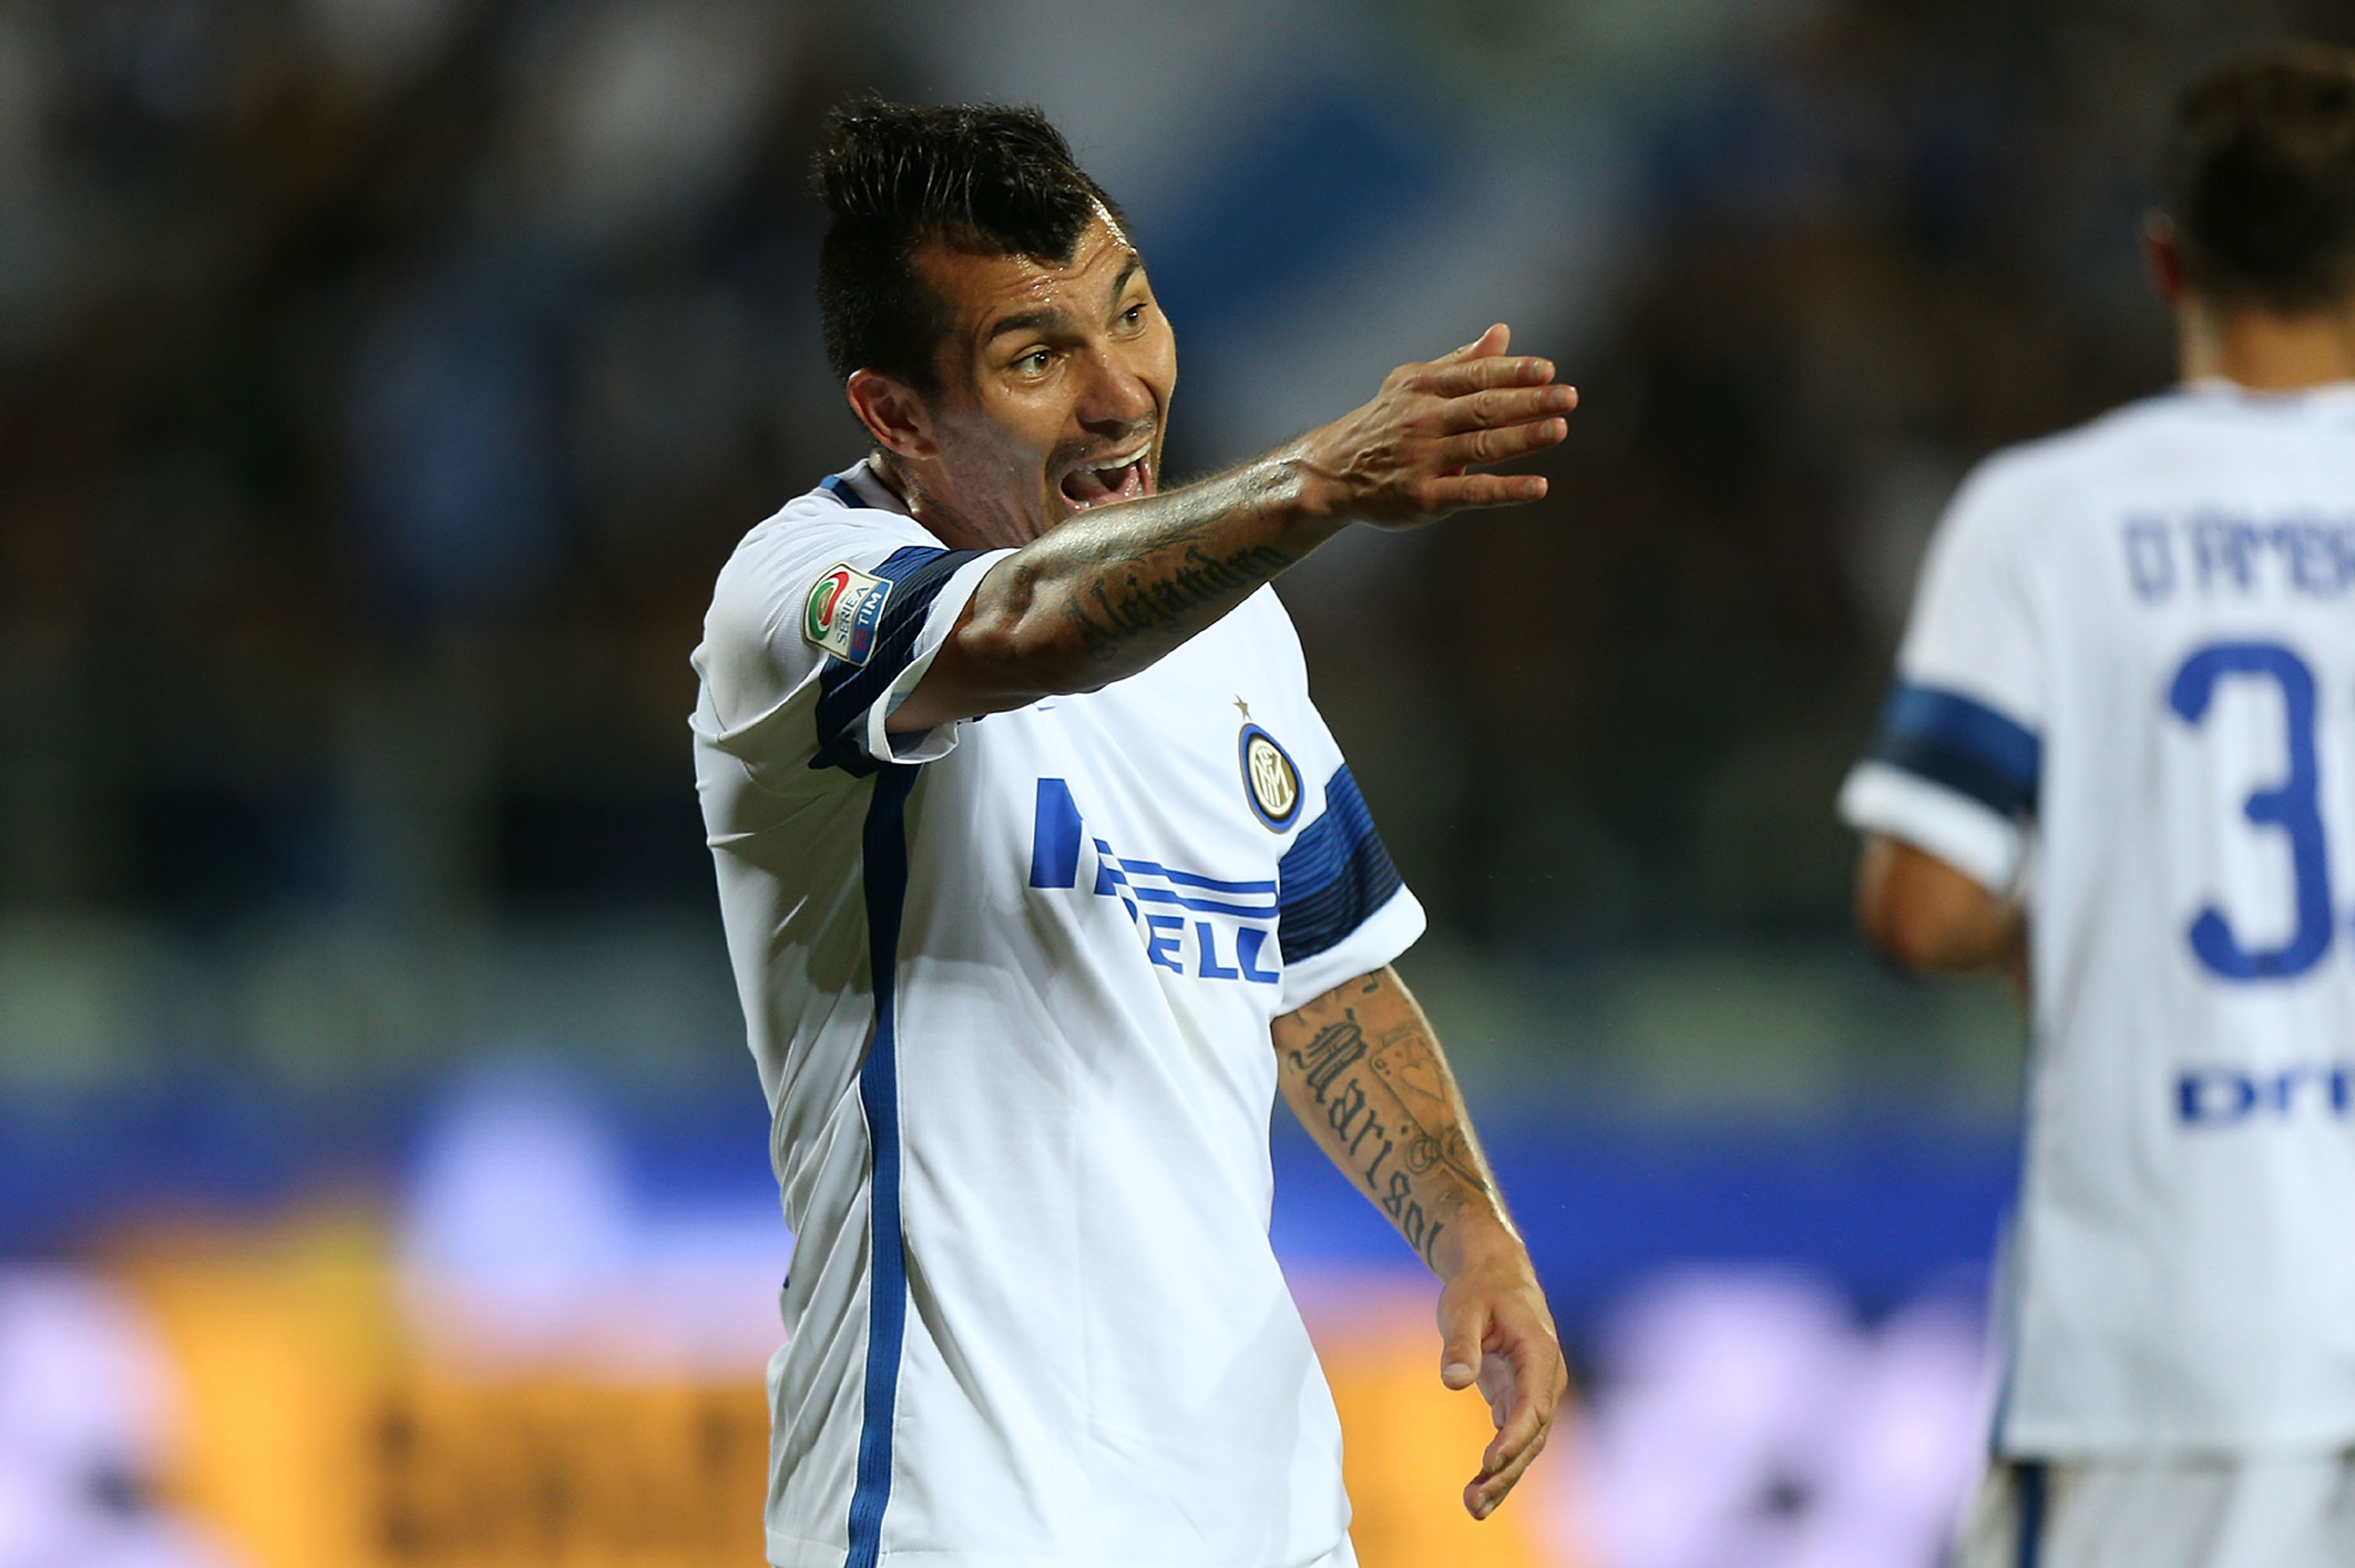 Medel’s contract renewal coming next